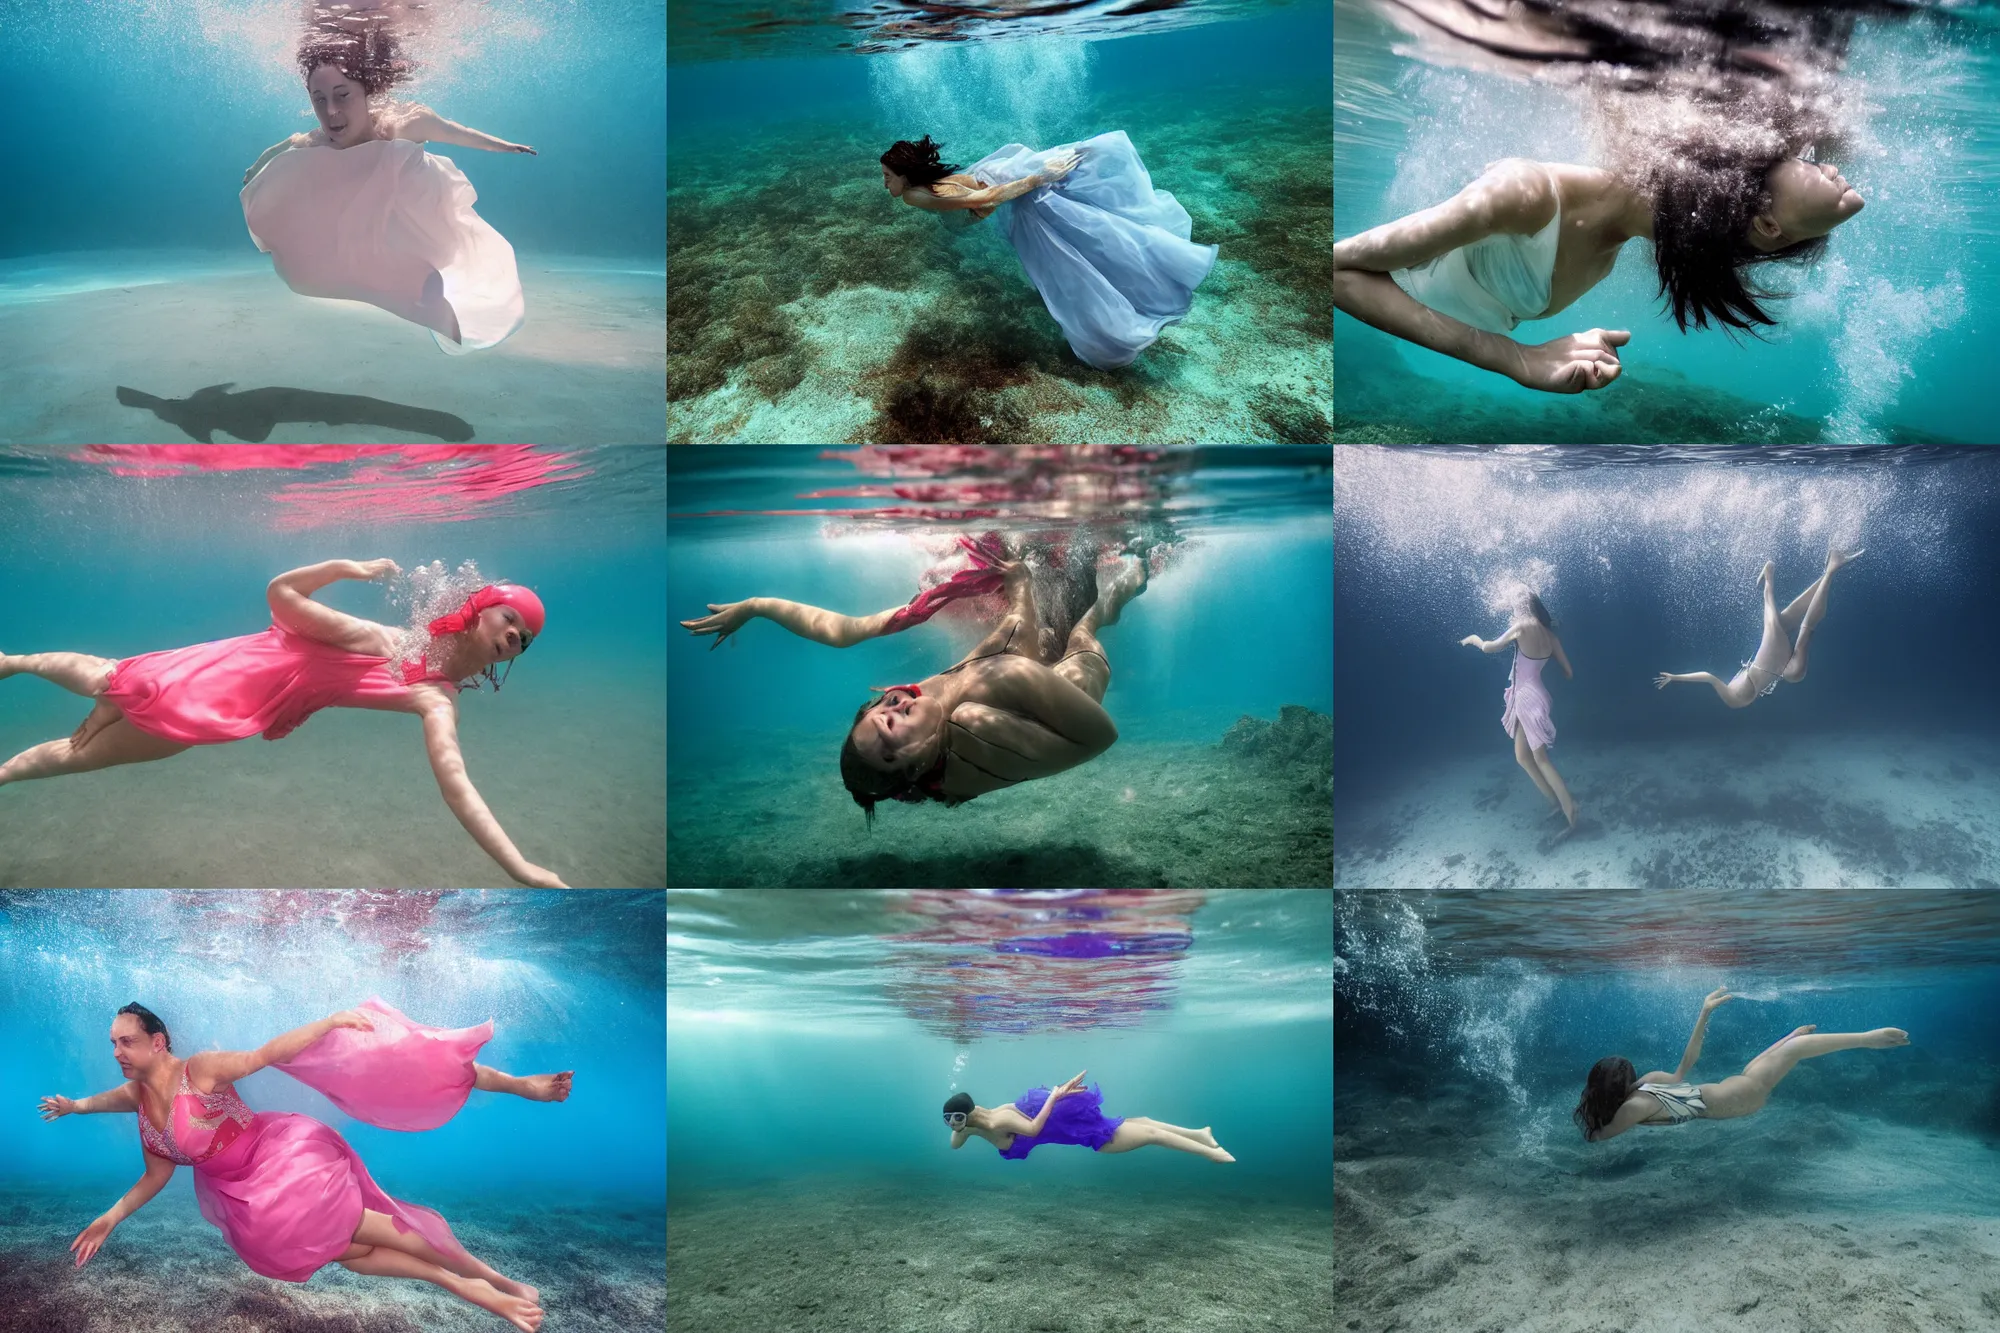 Prompt: An underwater photograph of a woman swimming with a dress on